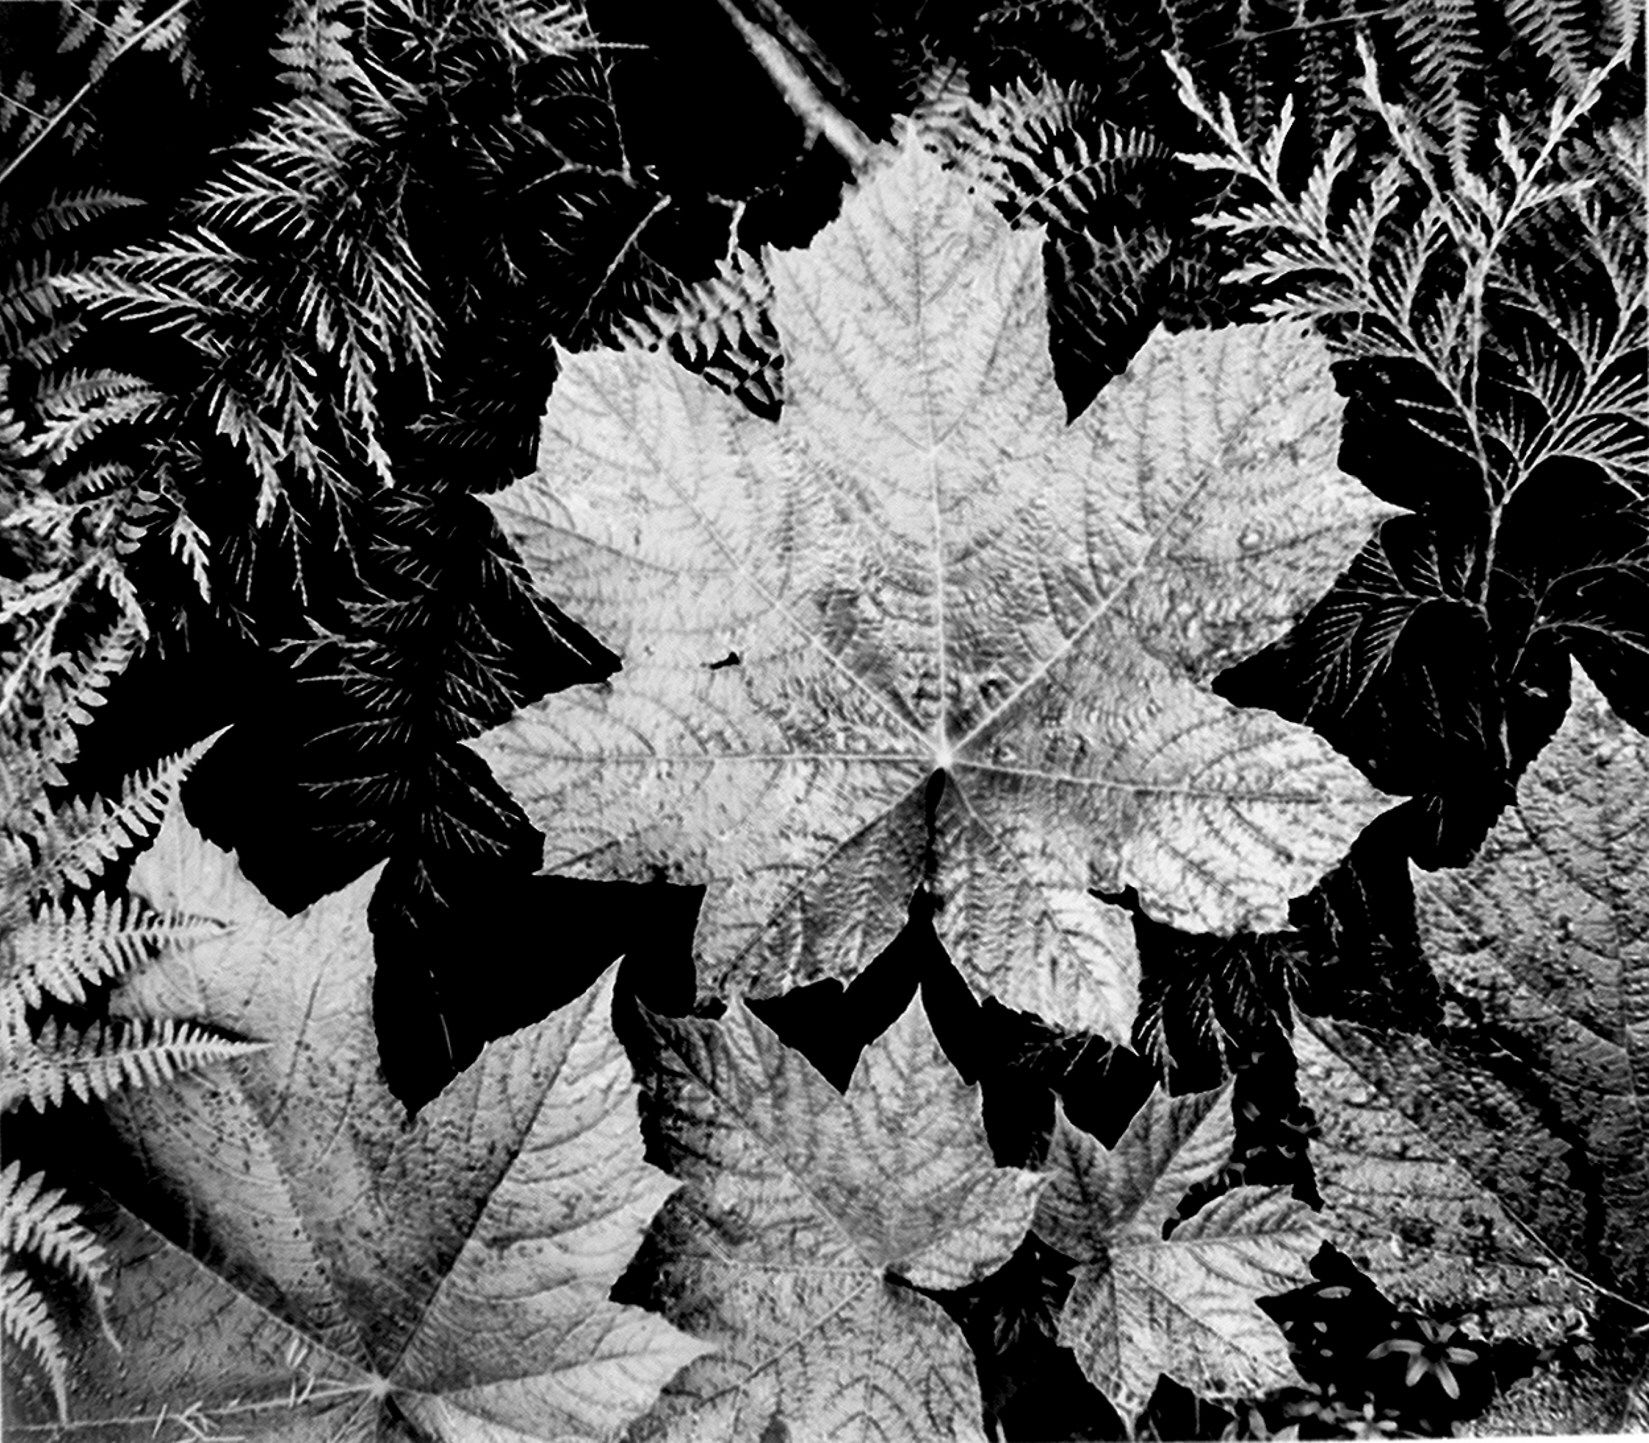 These stunning Ansel Adams photographs show the great outdoors in all its glory image 199